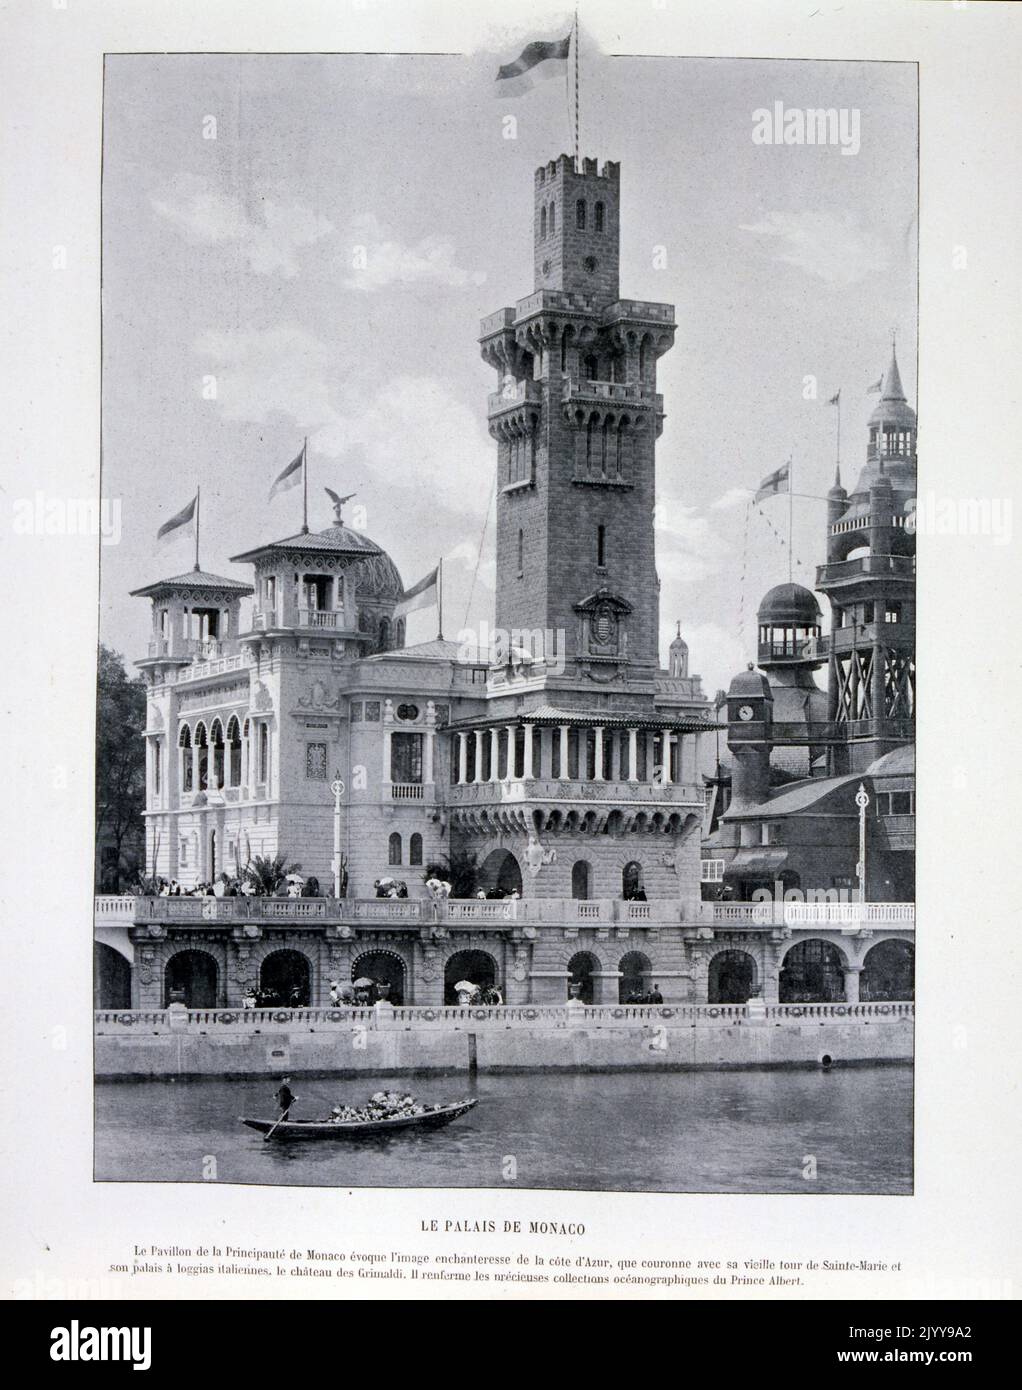 Exposition Universelle (World Fair) Paris, 1900; The Exposition Universelle of 1900, better known in English as the 1900 Paris Exposition, was a world's fair held in Paris, France, from 14 April to 12 November 1900, to celebrate the achievements of the past century and to accelerate development into the next. The style that was universally present in the Exposition was Art Nouveau. The fair, visited by nearly 50 million, displayed many technological innovations; black and white photograph of the Palace of Monoco Pavillion. Stock Photo